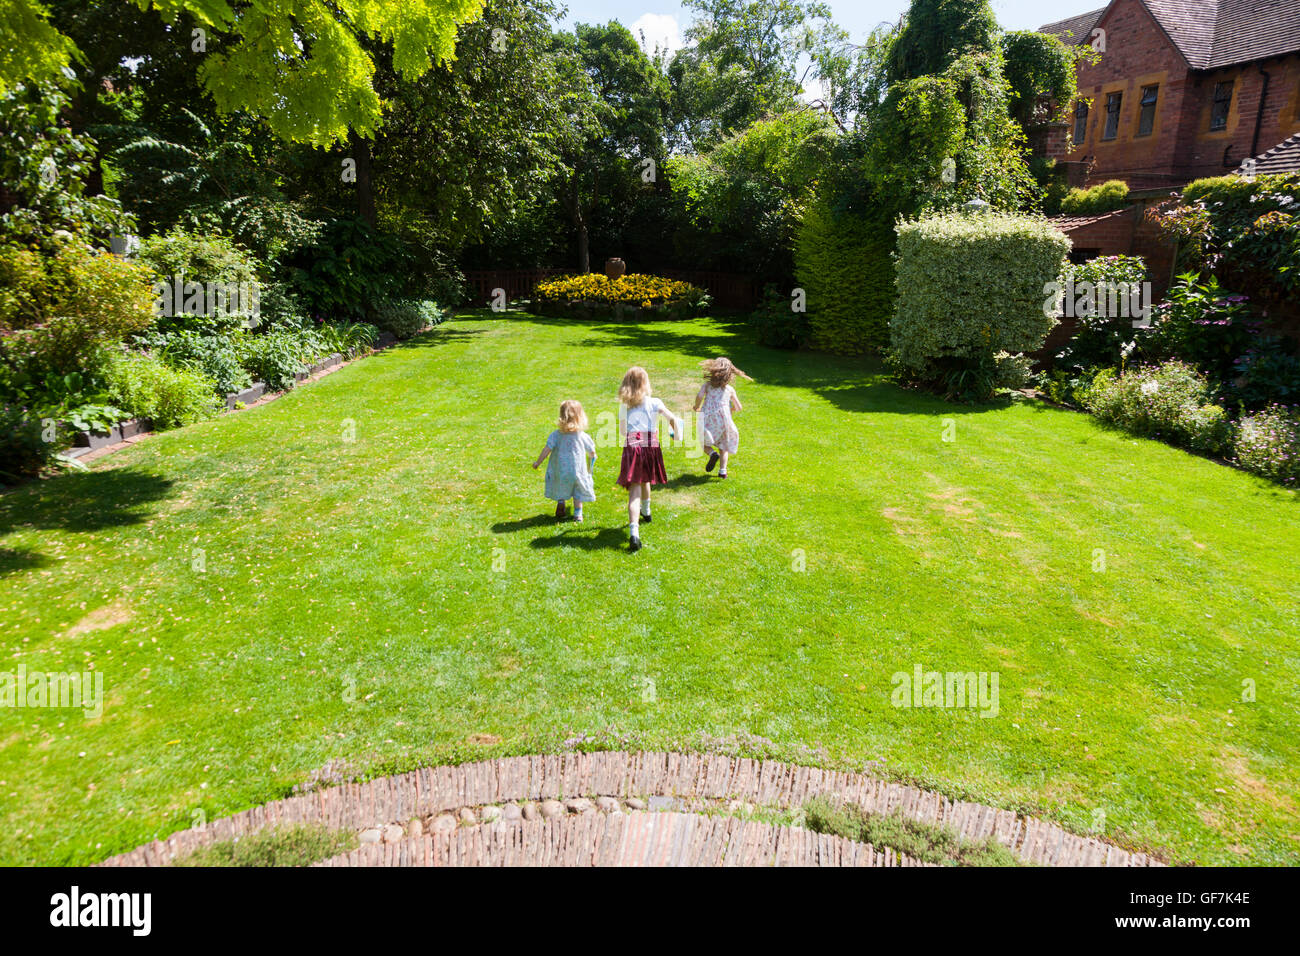 Greyfriars' House and Gardens with 3 children / kids / kid running & playing on the garden lawn grass. Friar St, Worcester. UK Stock Photo